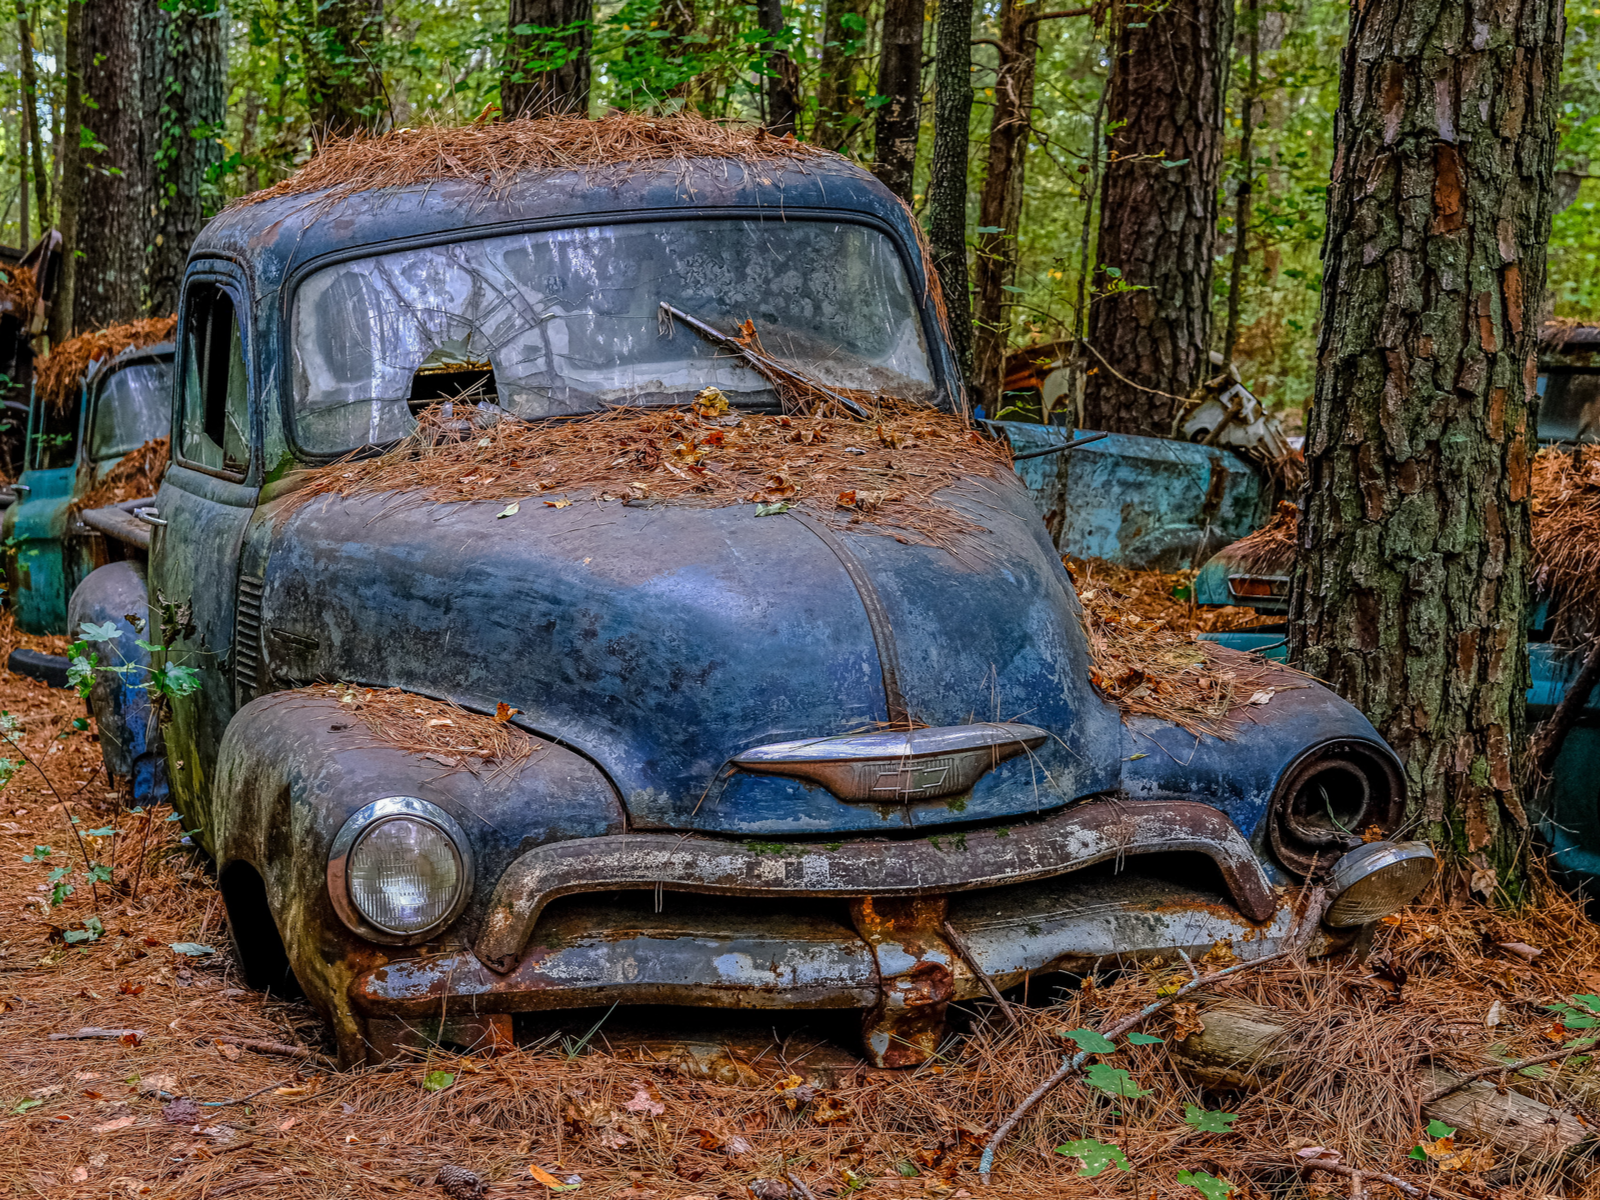 A vintage blue Chevrolet car junked in a forest at Old Car City, one of the best tourist attractions in Georgia, and portions of other old cars visible in background